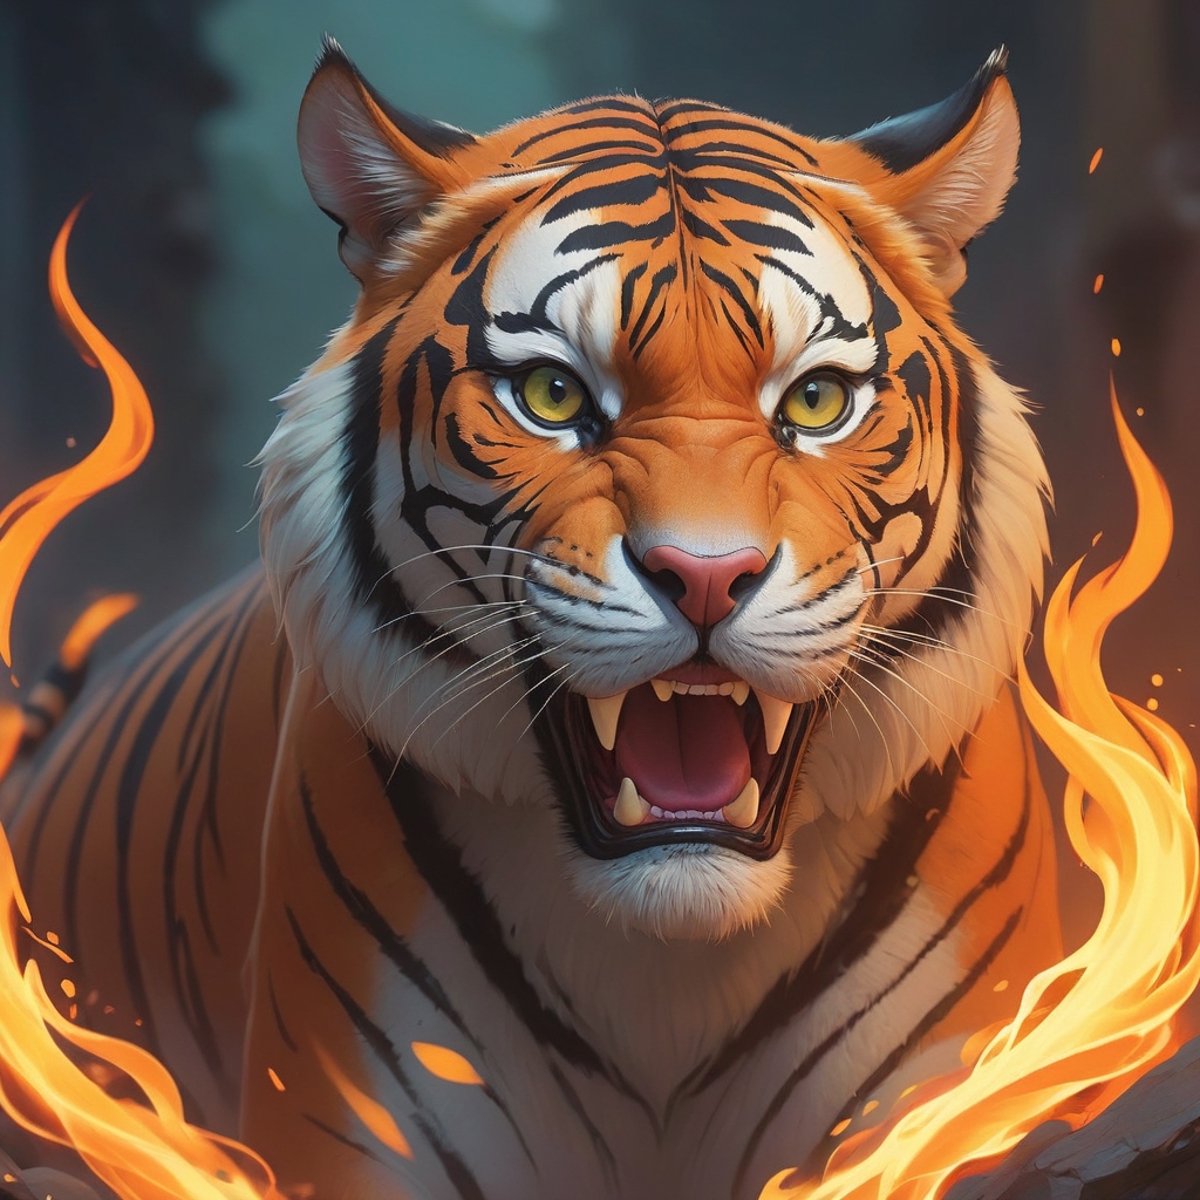 A close-up of a tiger's face with a fierce expression, surrounded by flames.